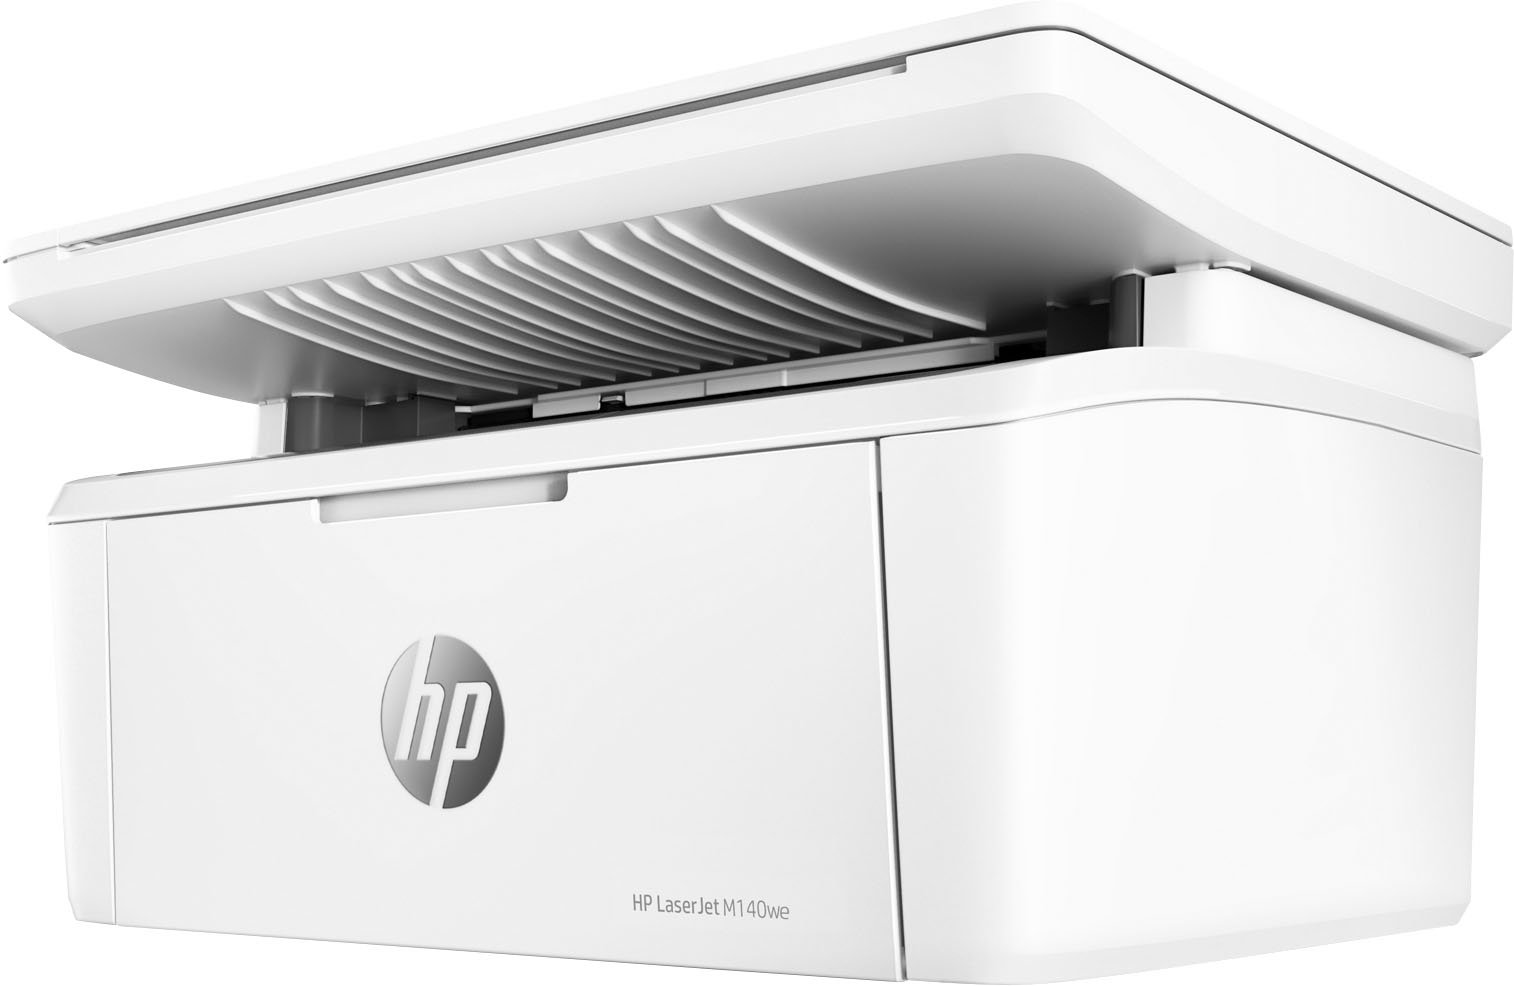 HP+ 6 Instant included of LaserJet Wireless White M140we with Buy months Laser - M140we LaserJet White HP with Best Black Ink Printer and